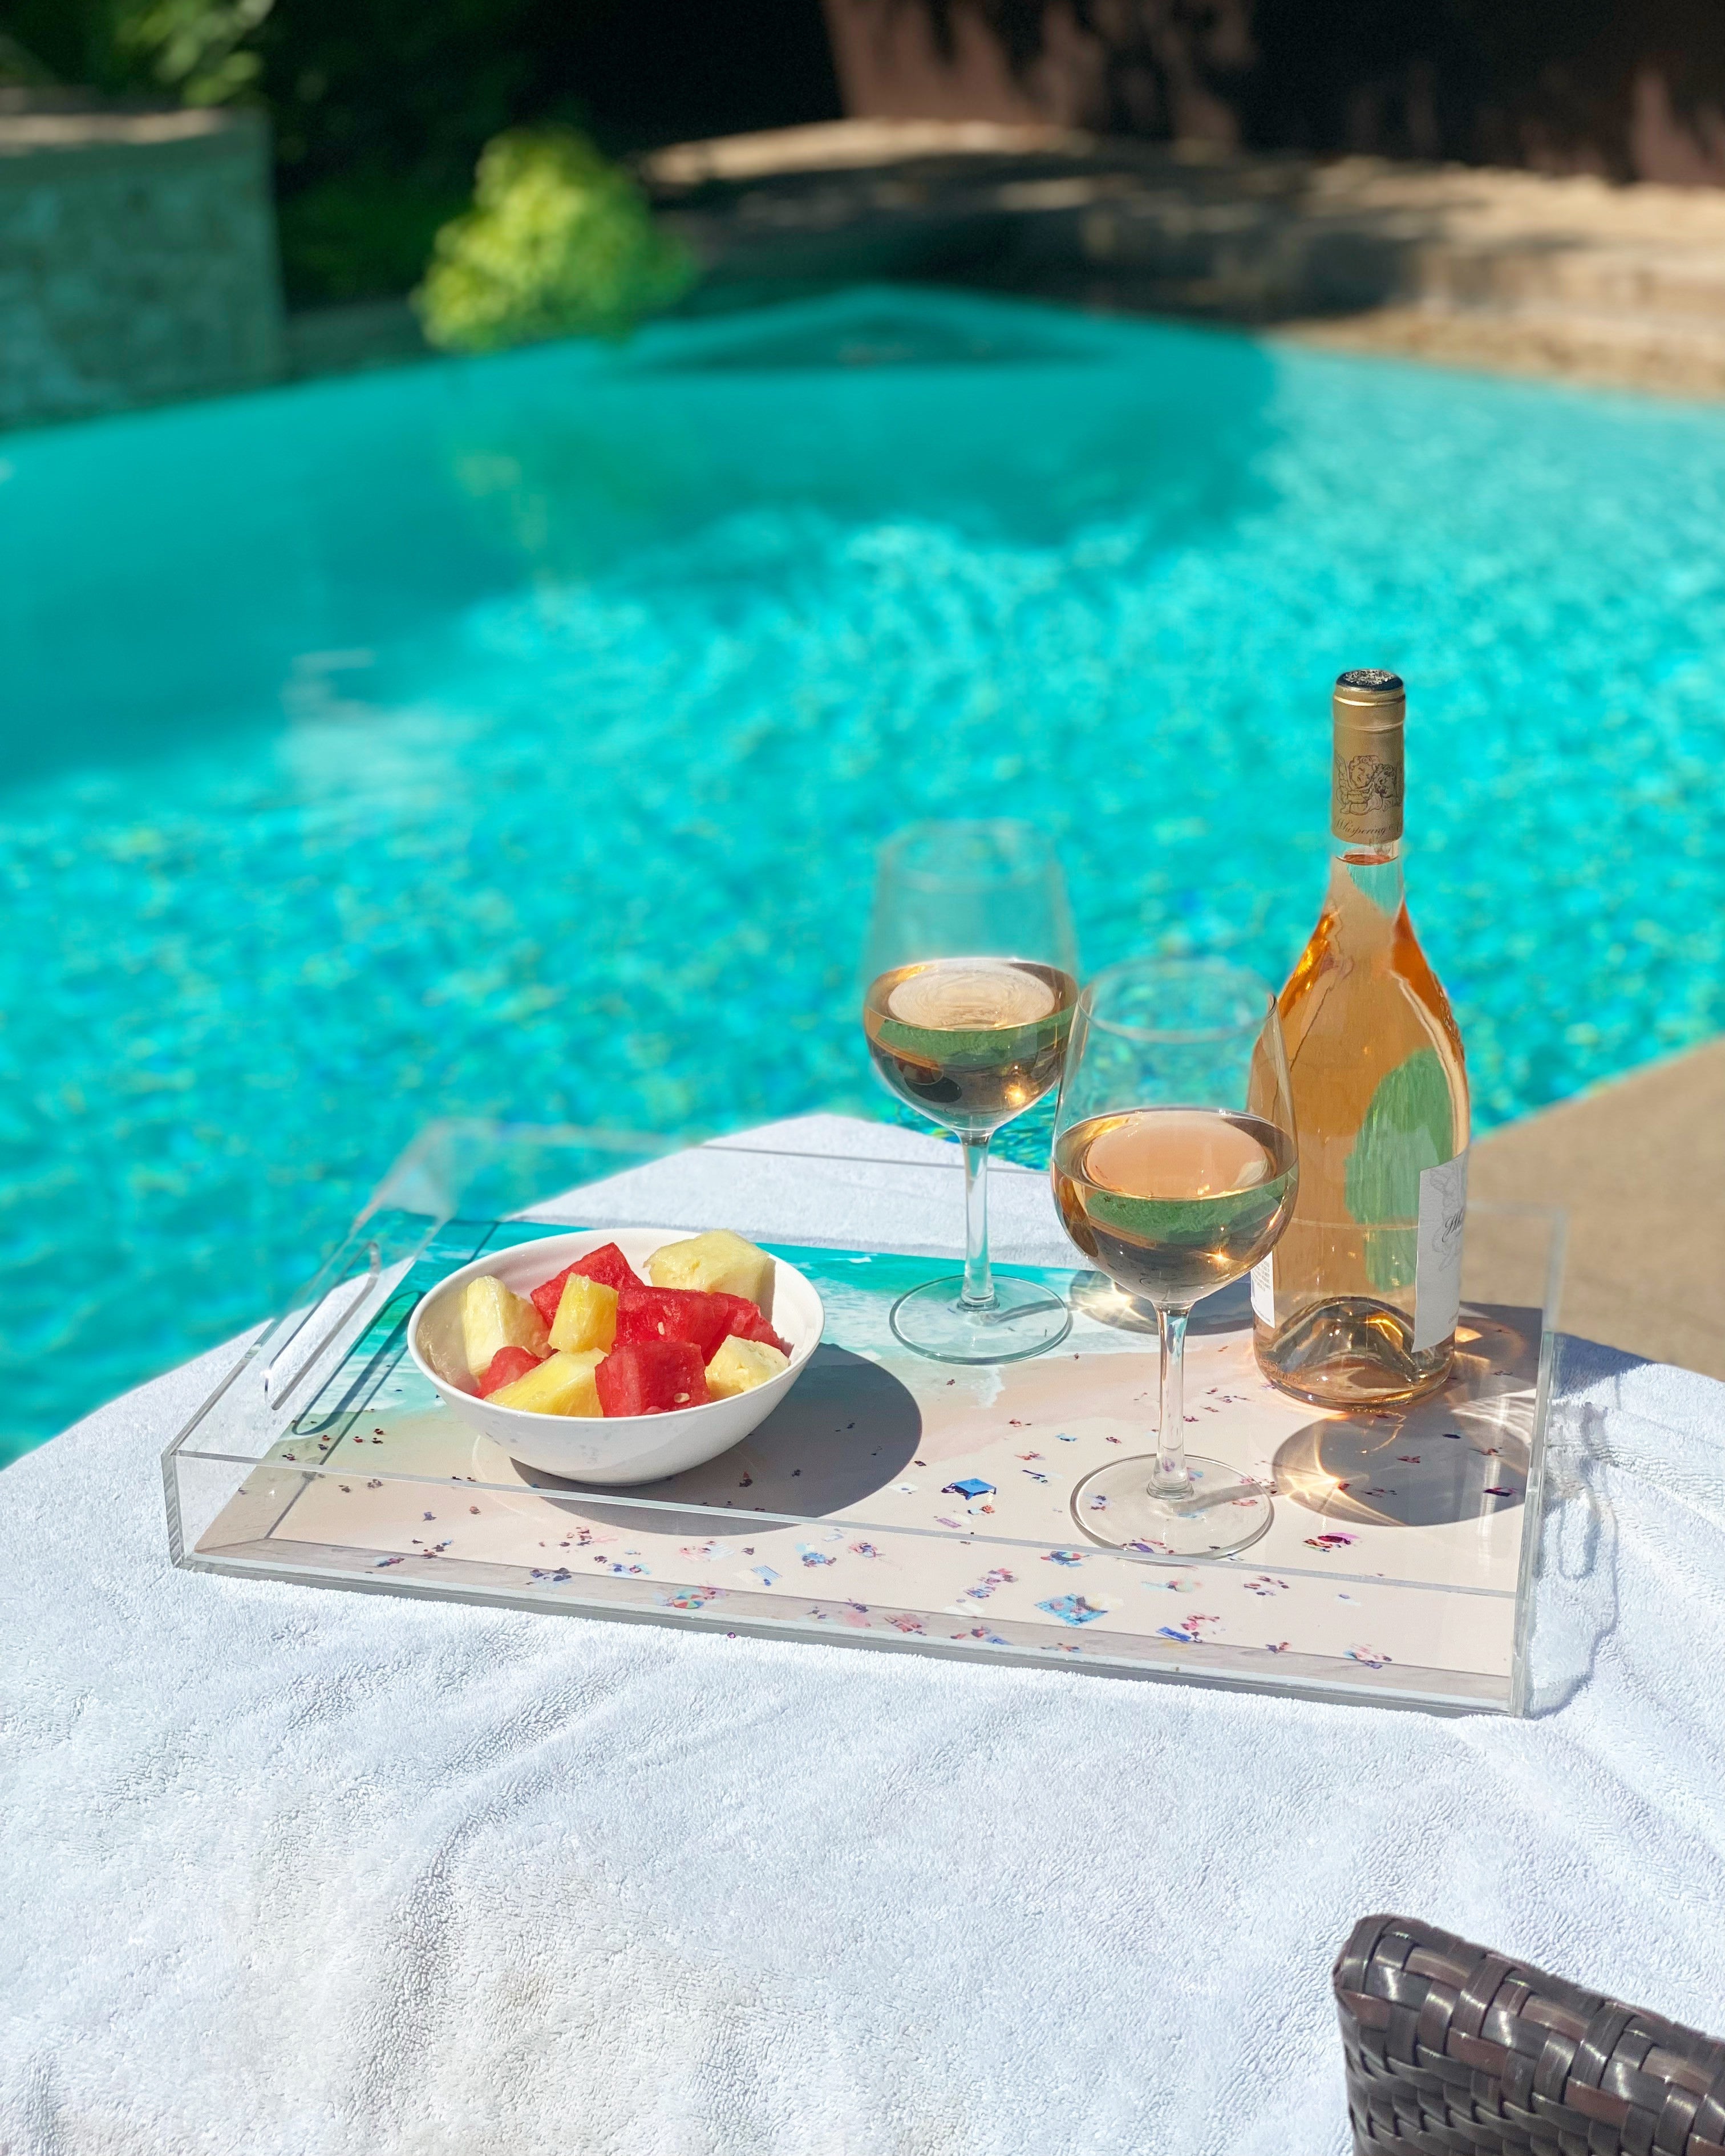 Statement Home clear acrylic serving tray with fruit and wine by the pool